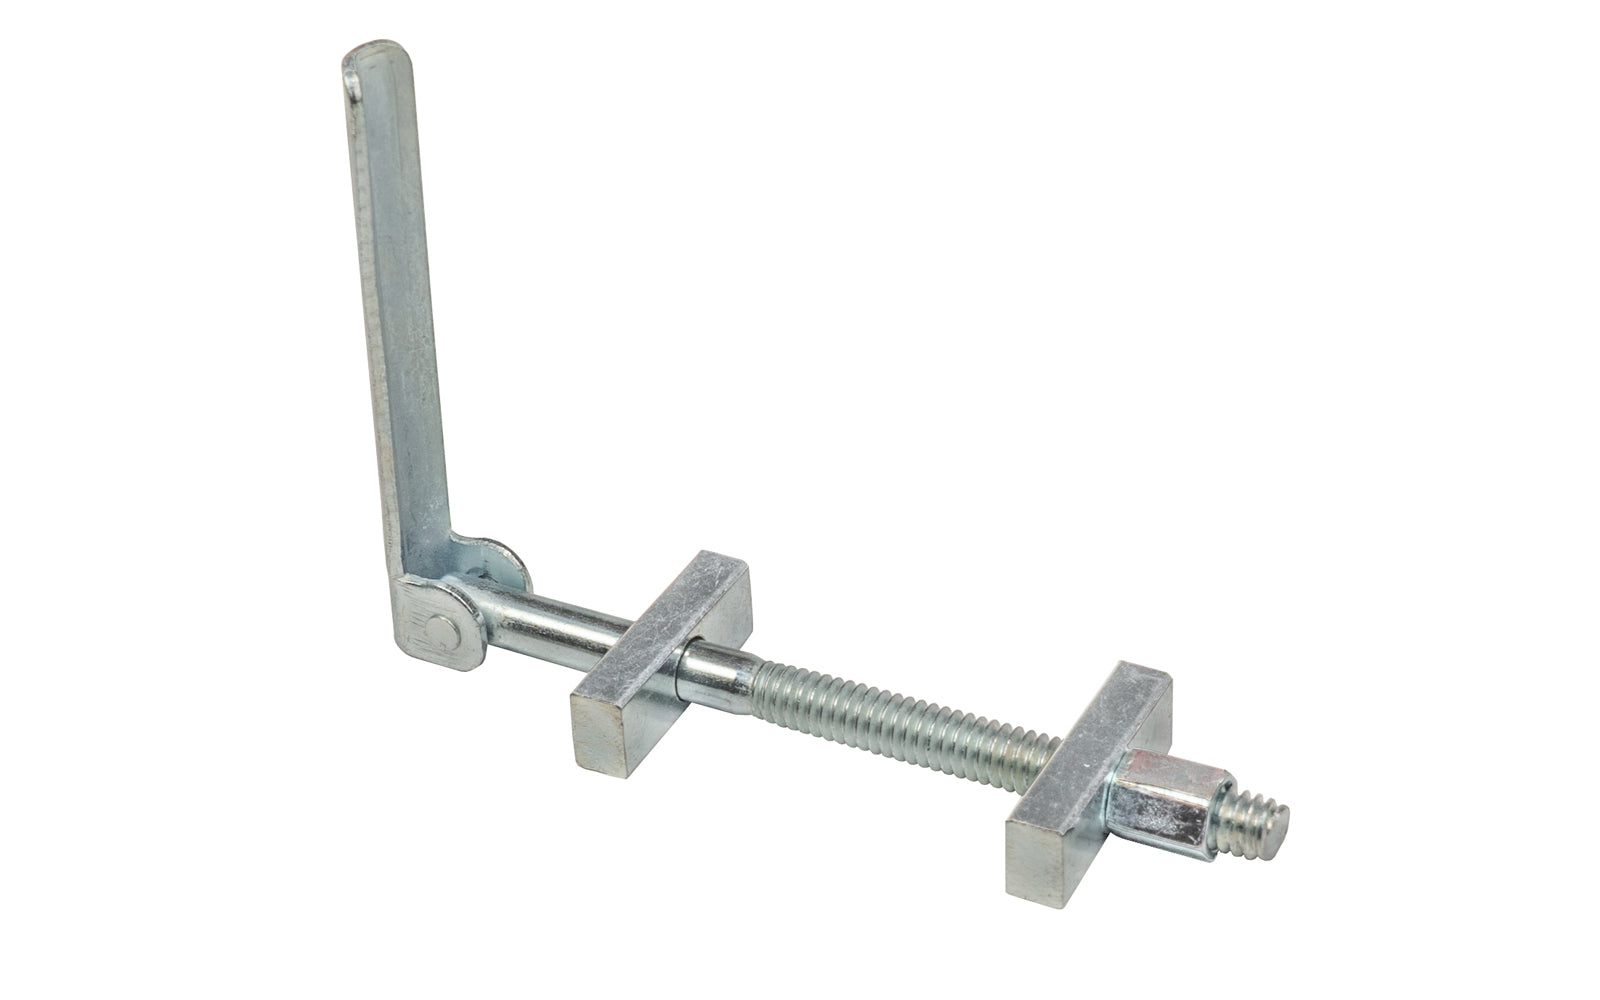 FastCap FlipBolt ~ Countertop Connector is fast & easy to use for countertops, fastening/ scribing stiles & invisible connectors with routing.